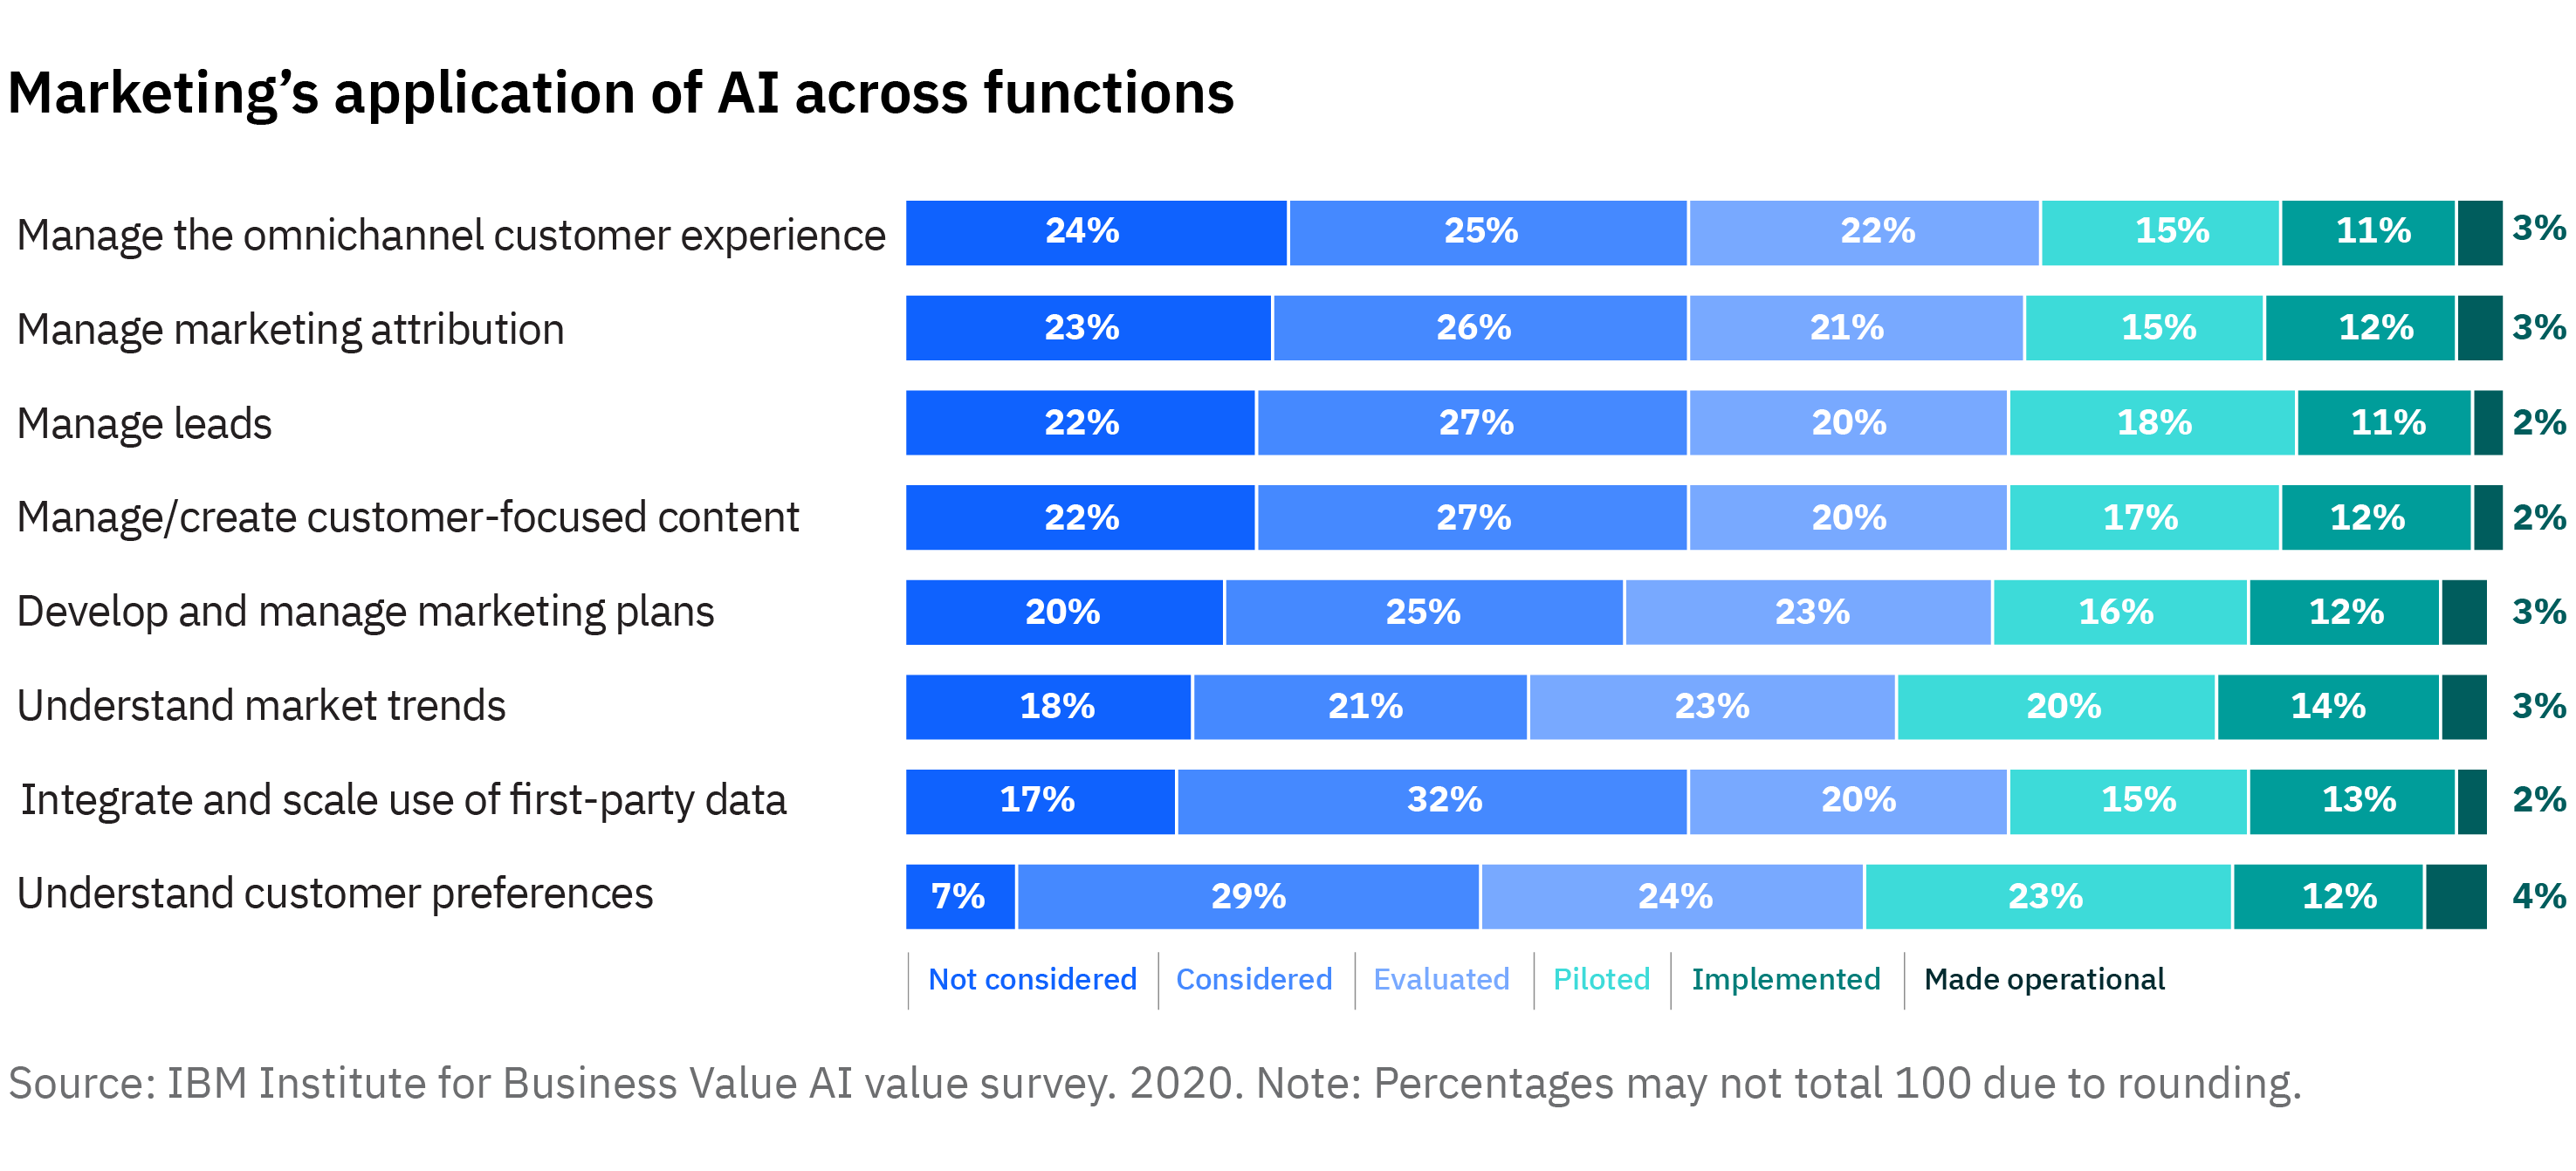 Marketers are considering AI, but few are using it to personalize the customer journey.